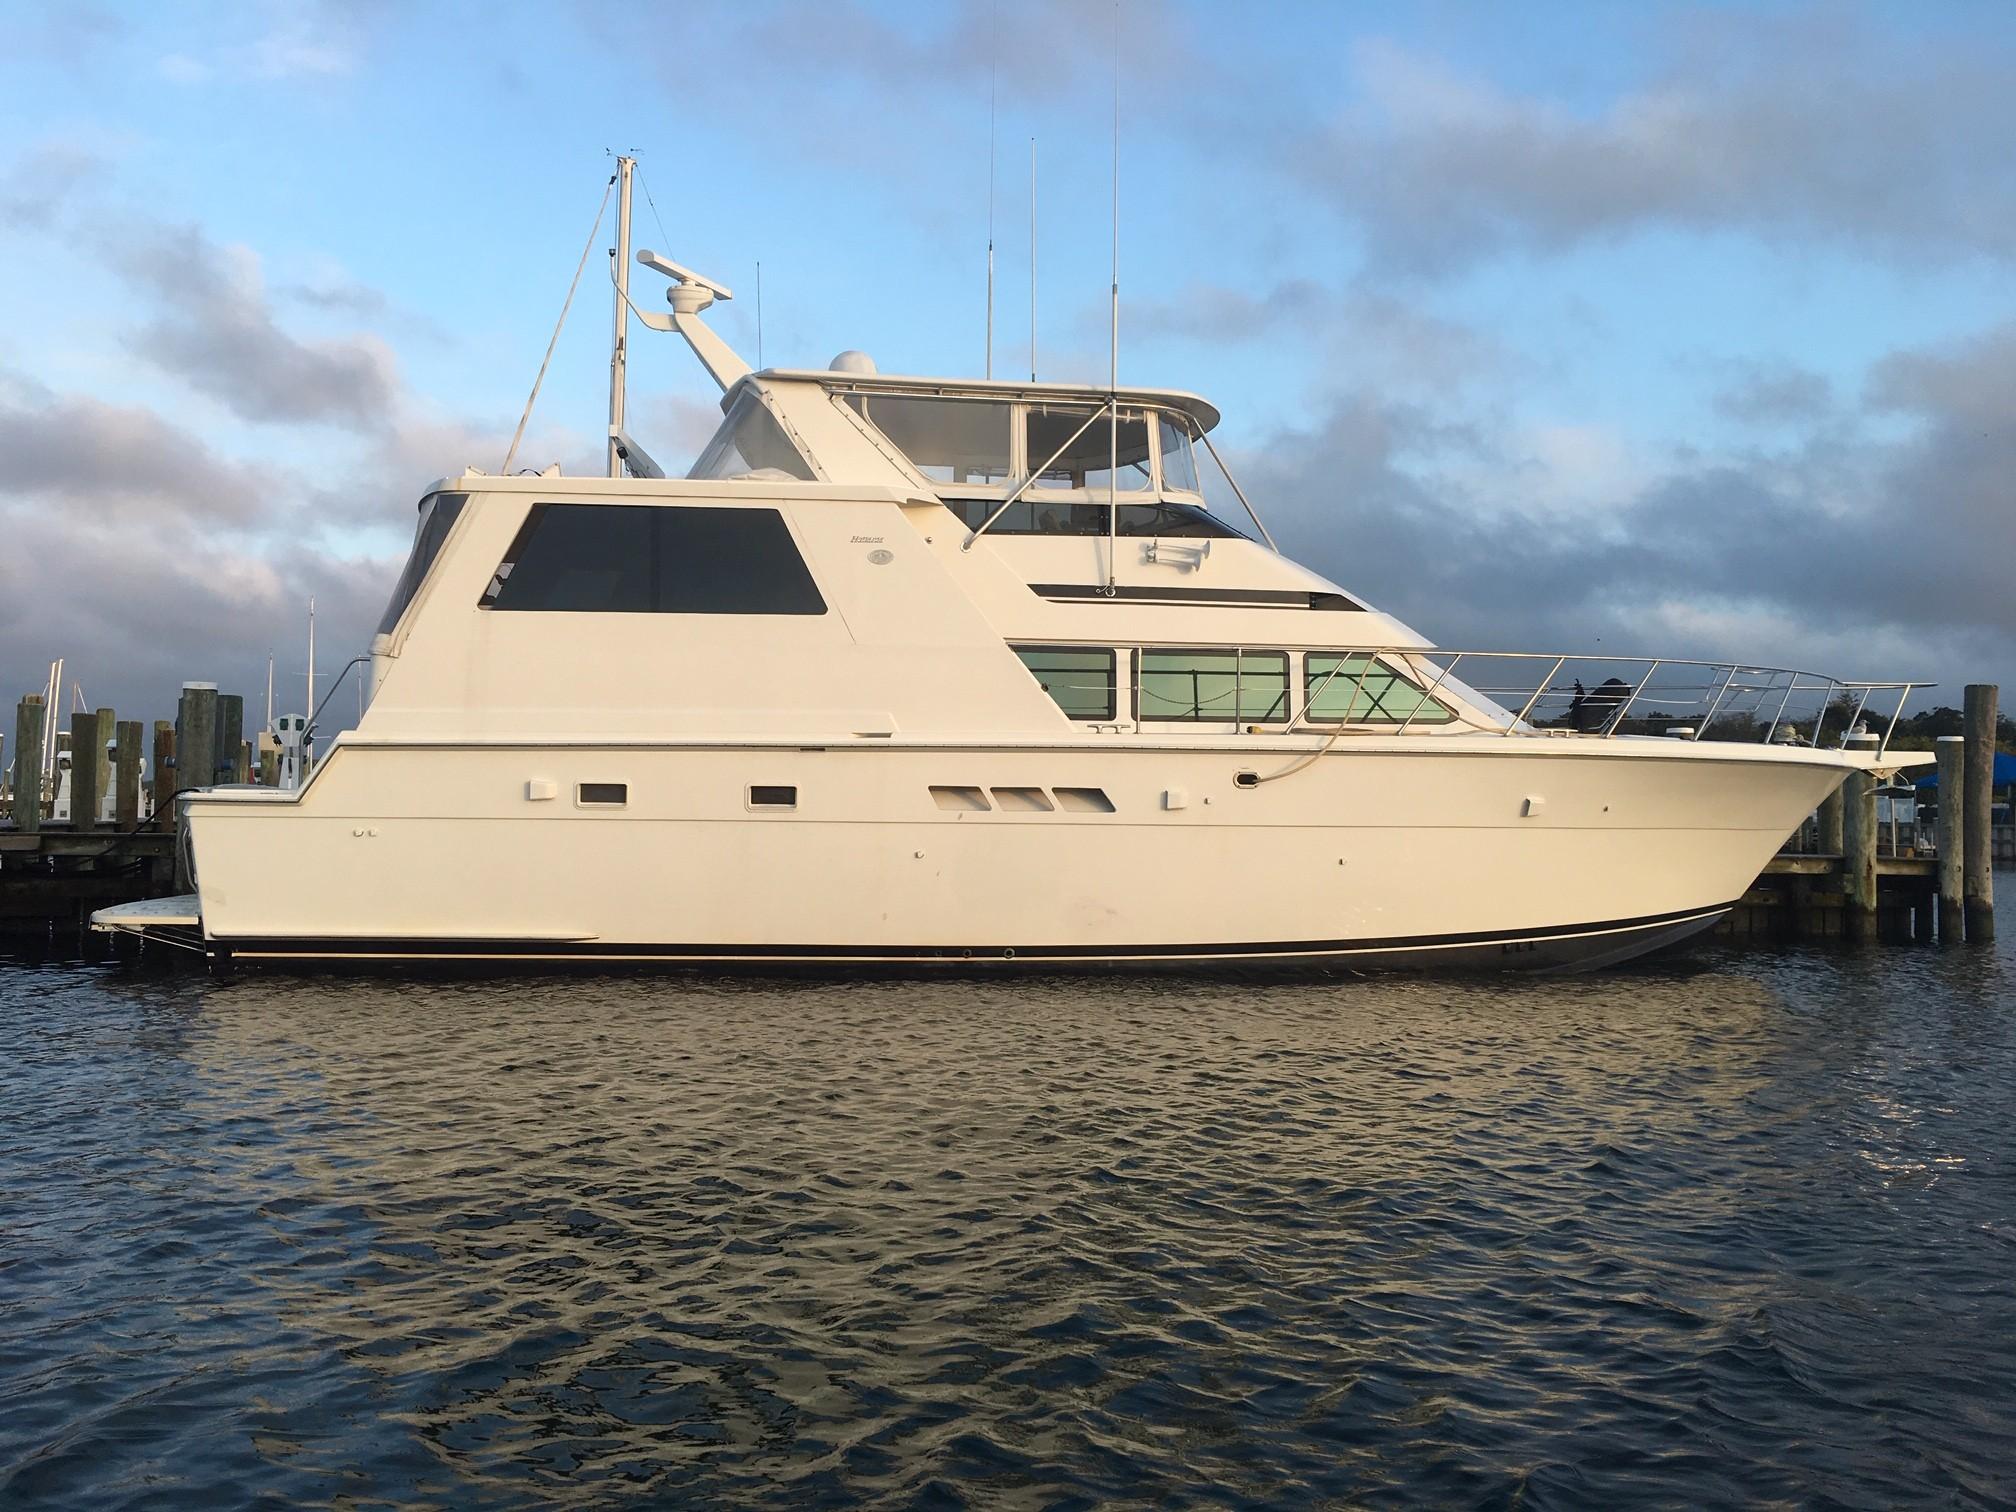 52 ft yacht for sale